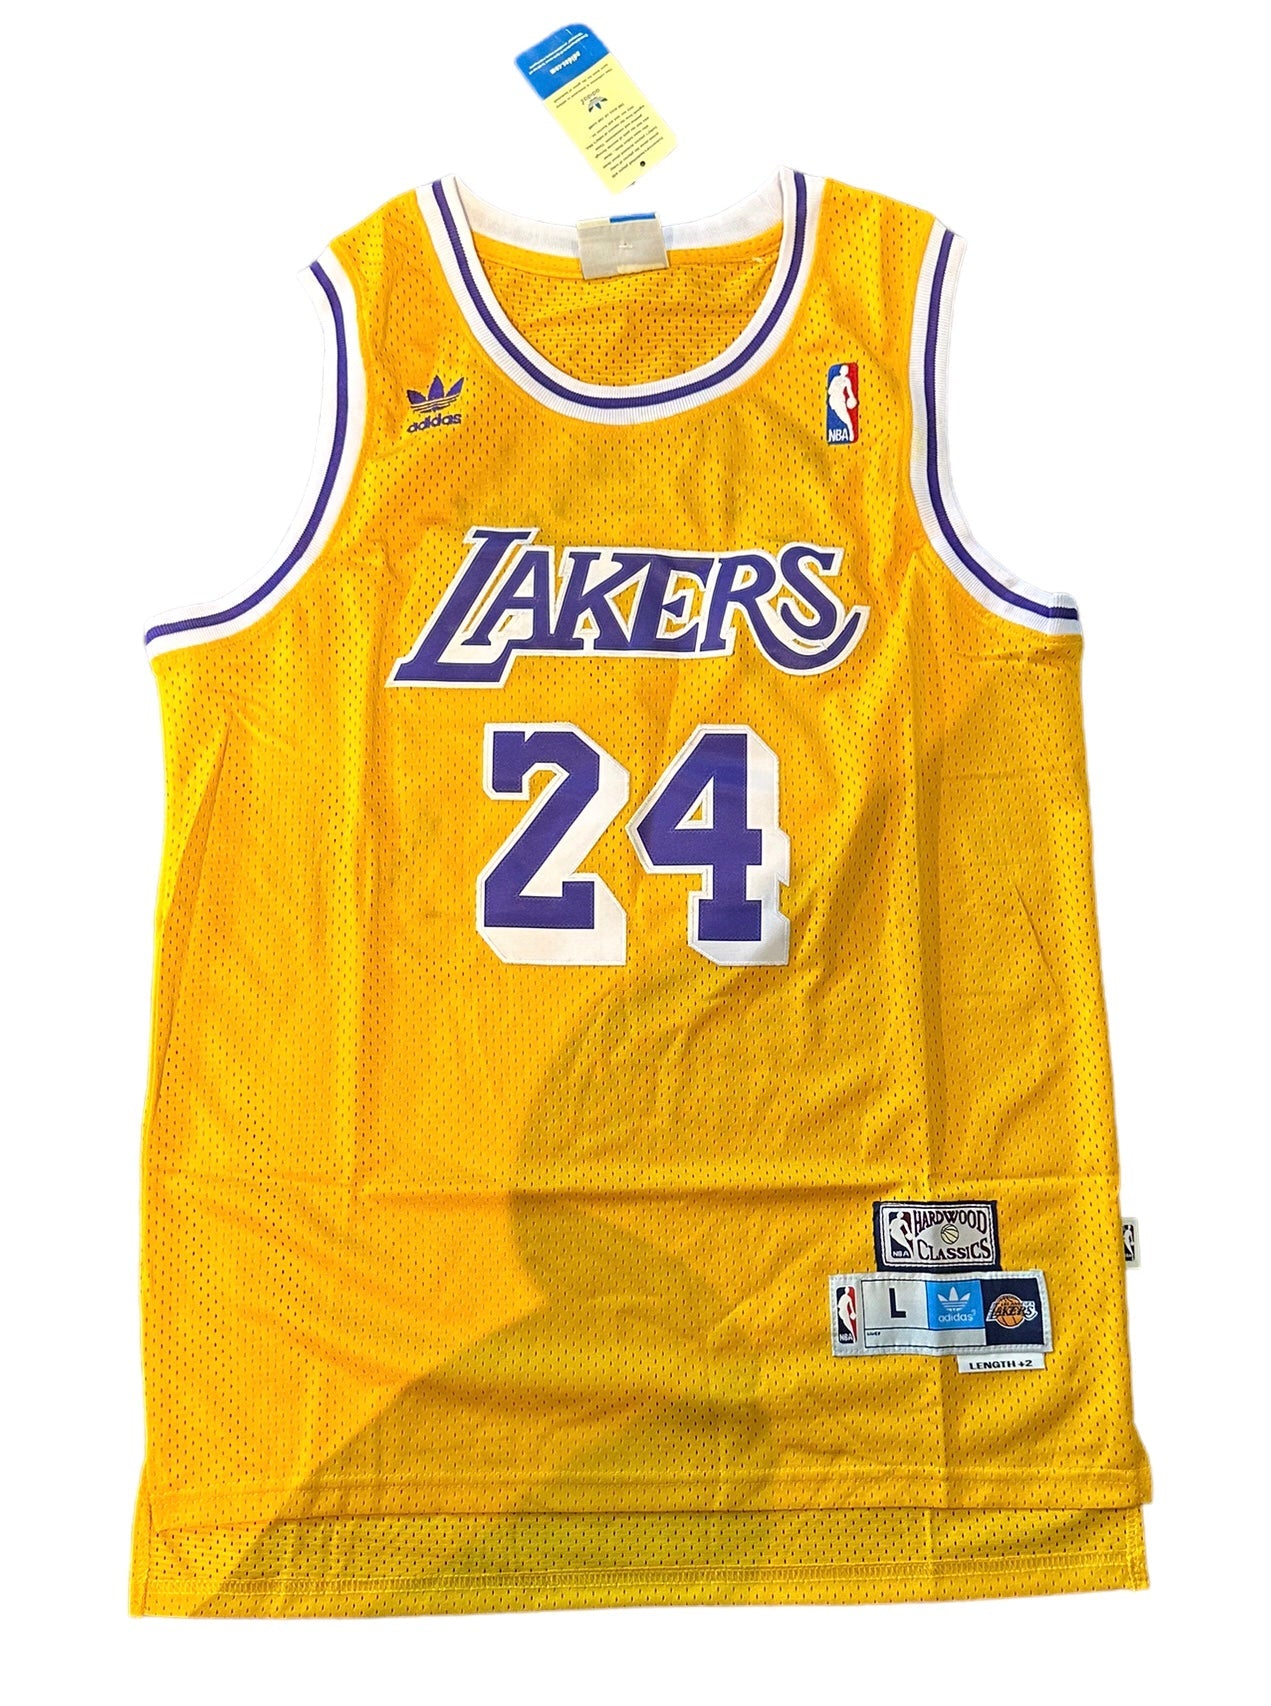 Lakers 24 Collection Kobe Bryant